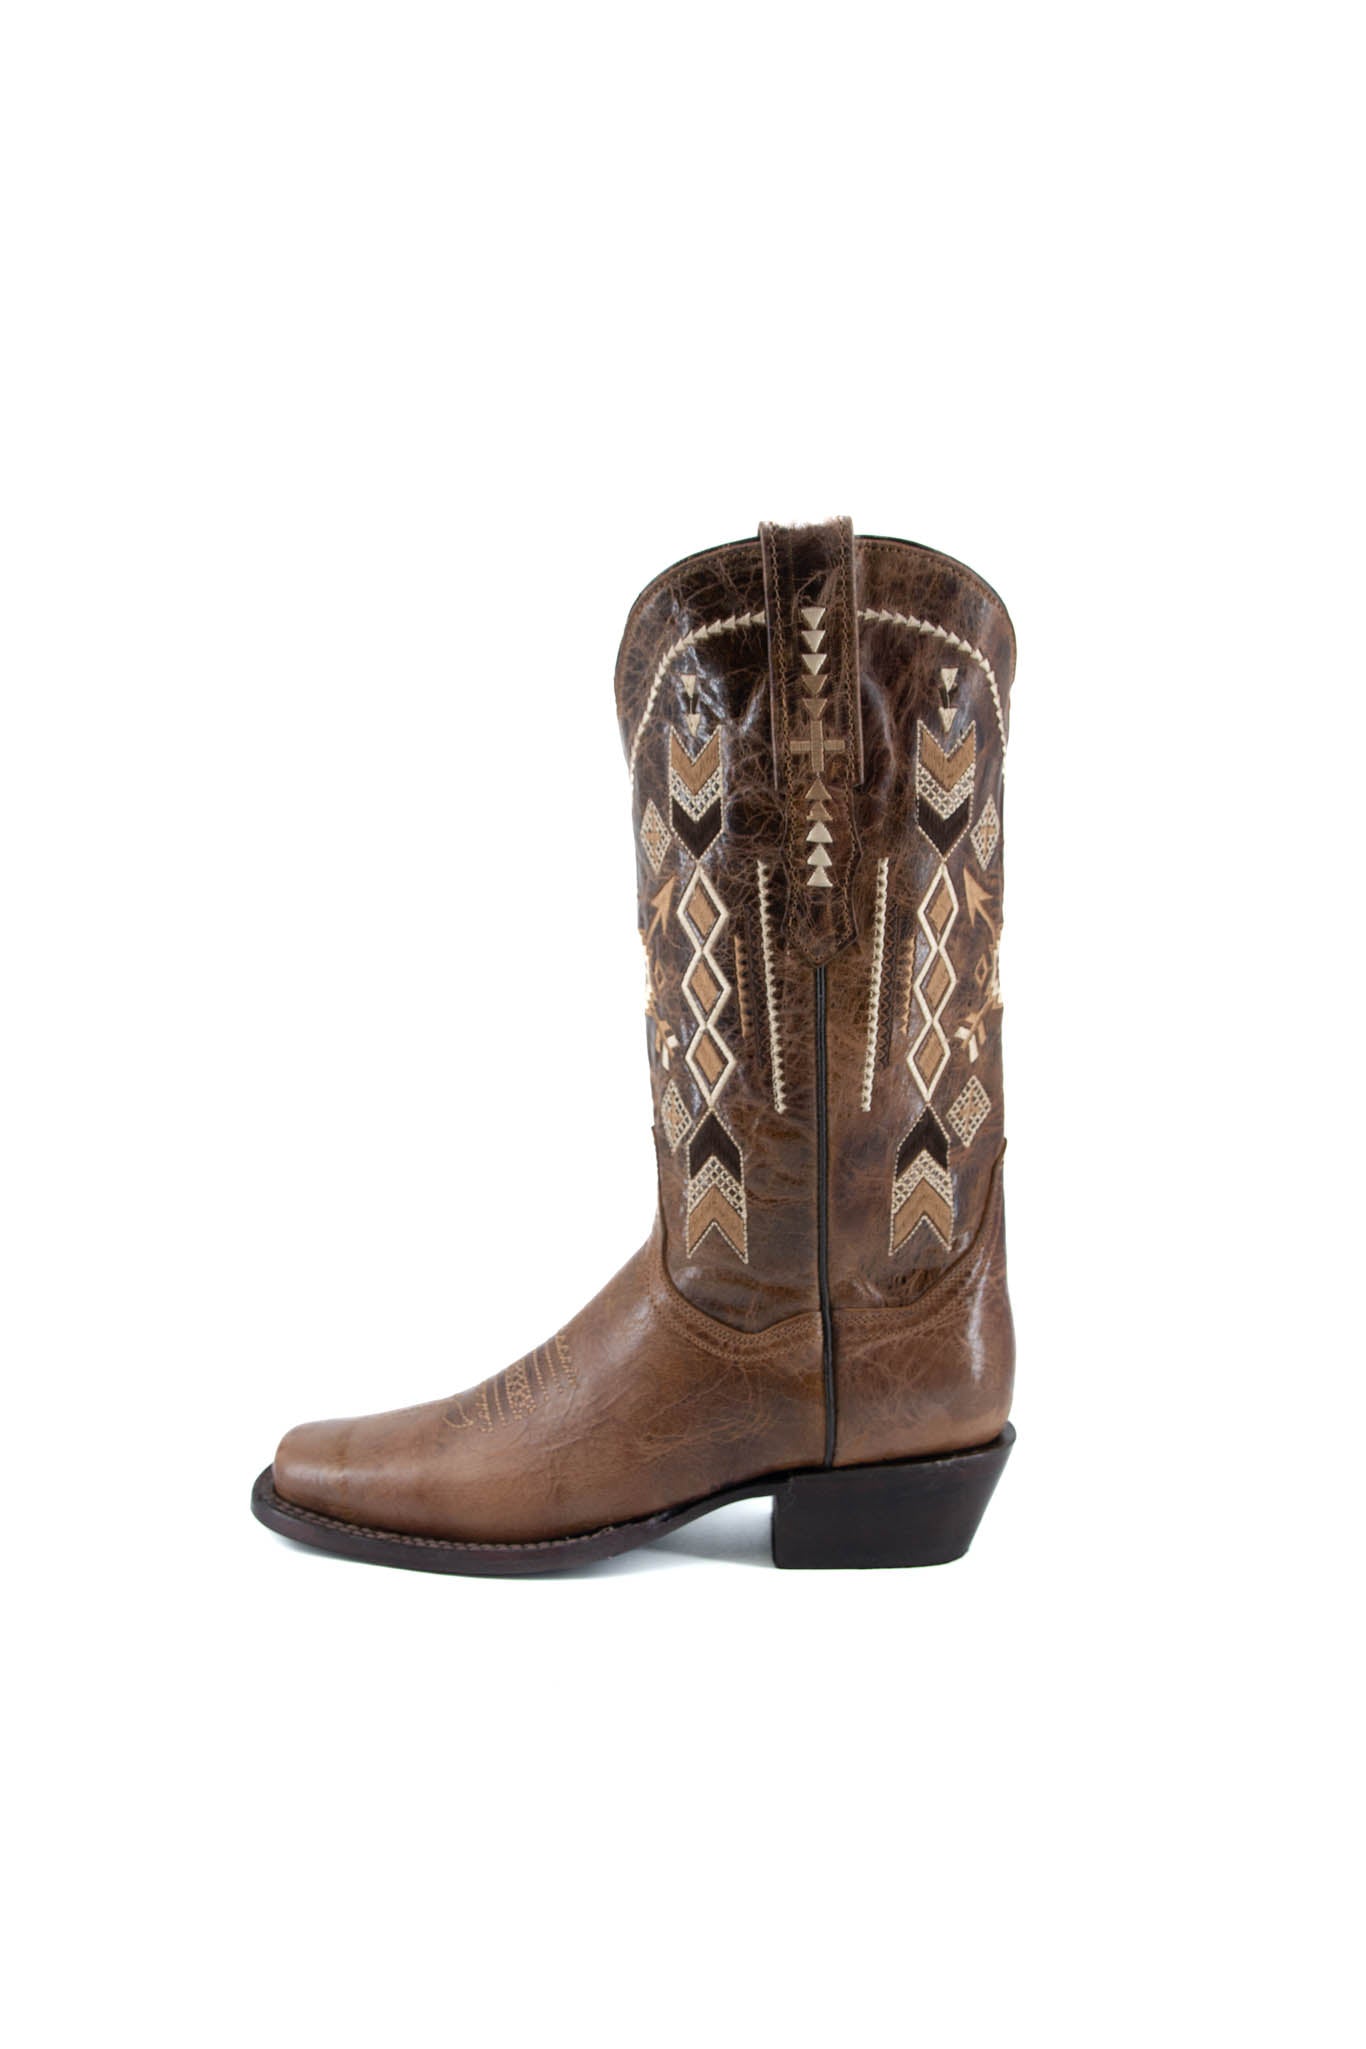 Rustic Brown Azteck Frontier Cowgirl Boot